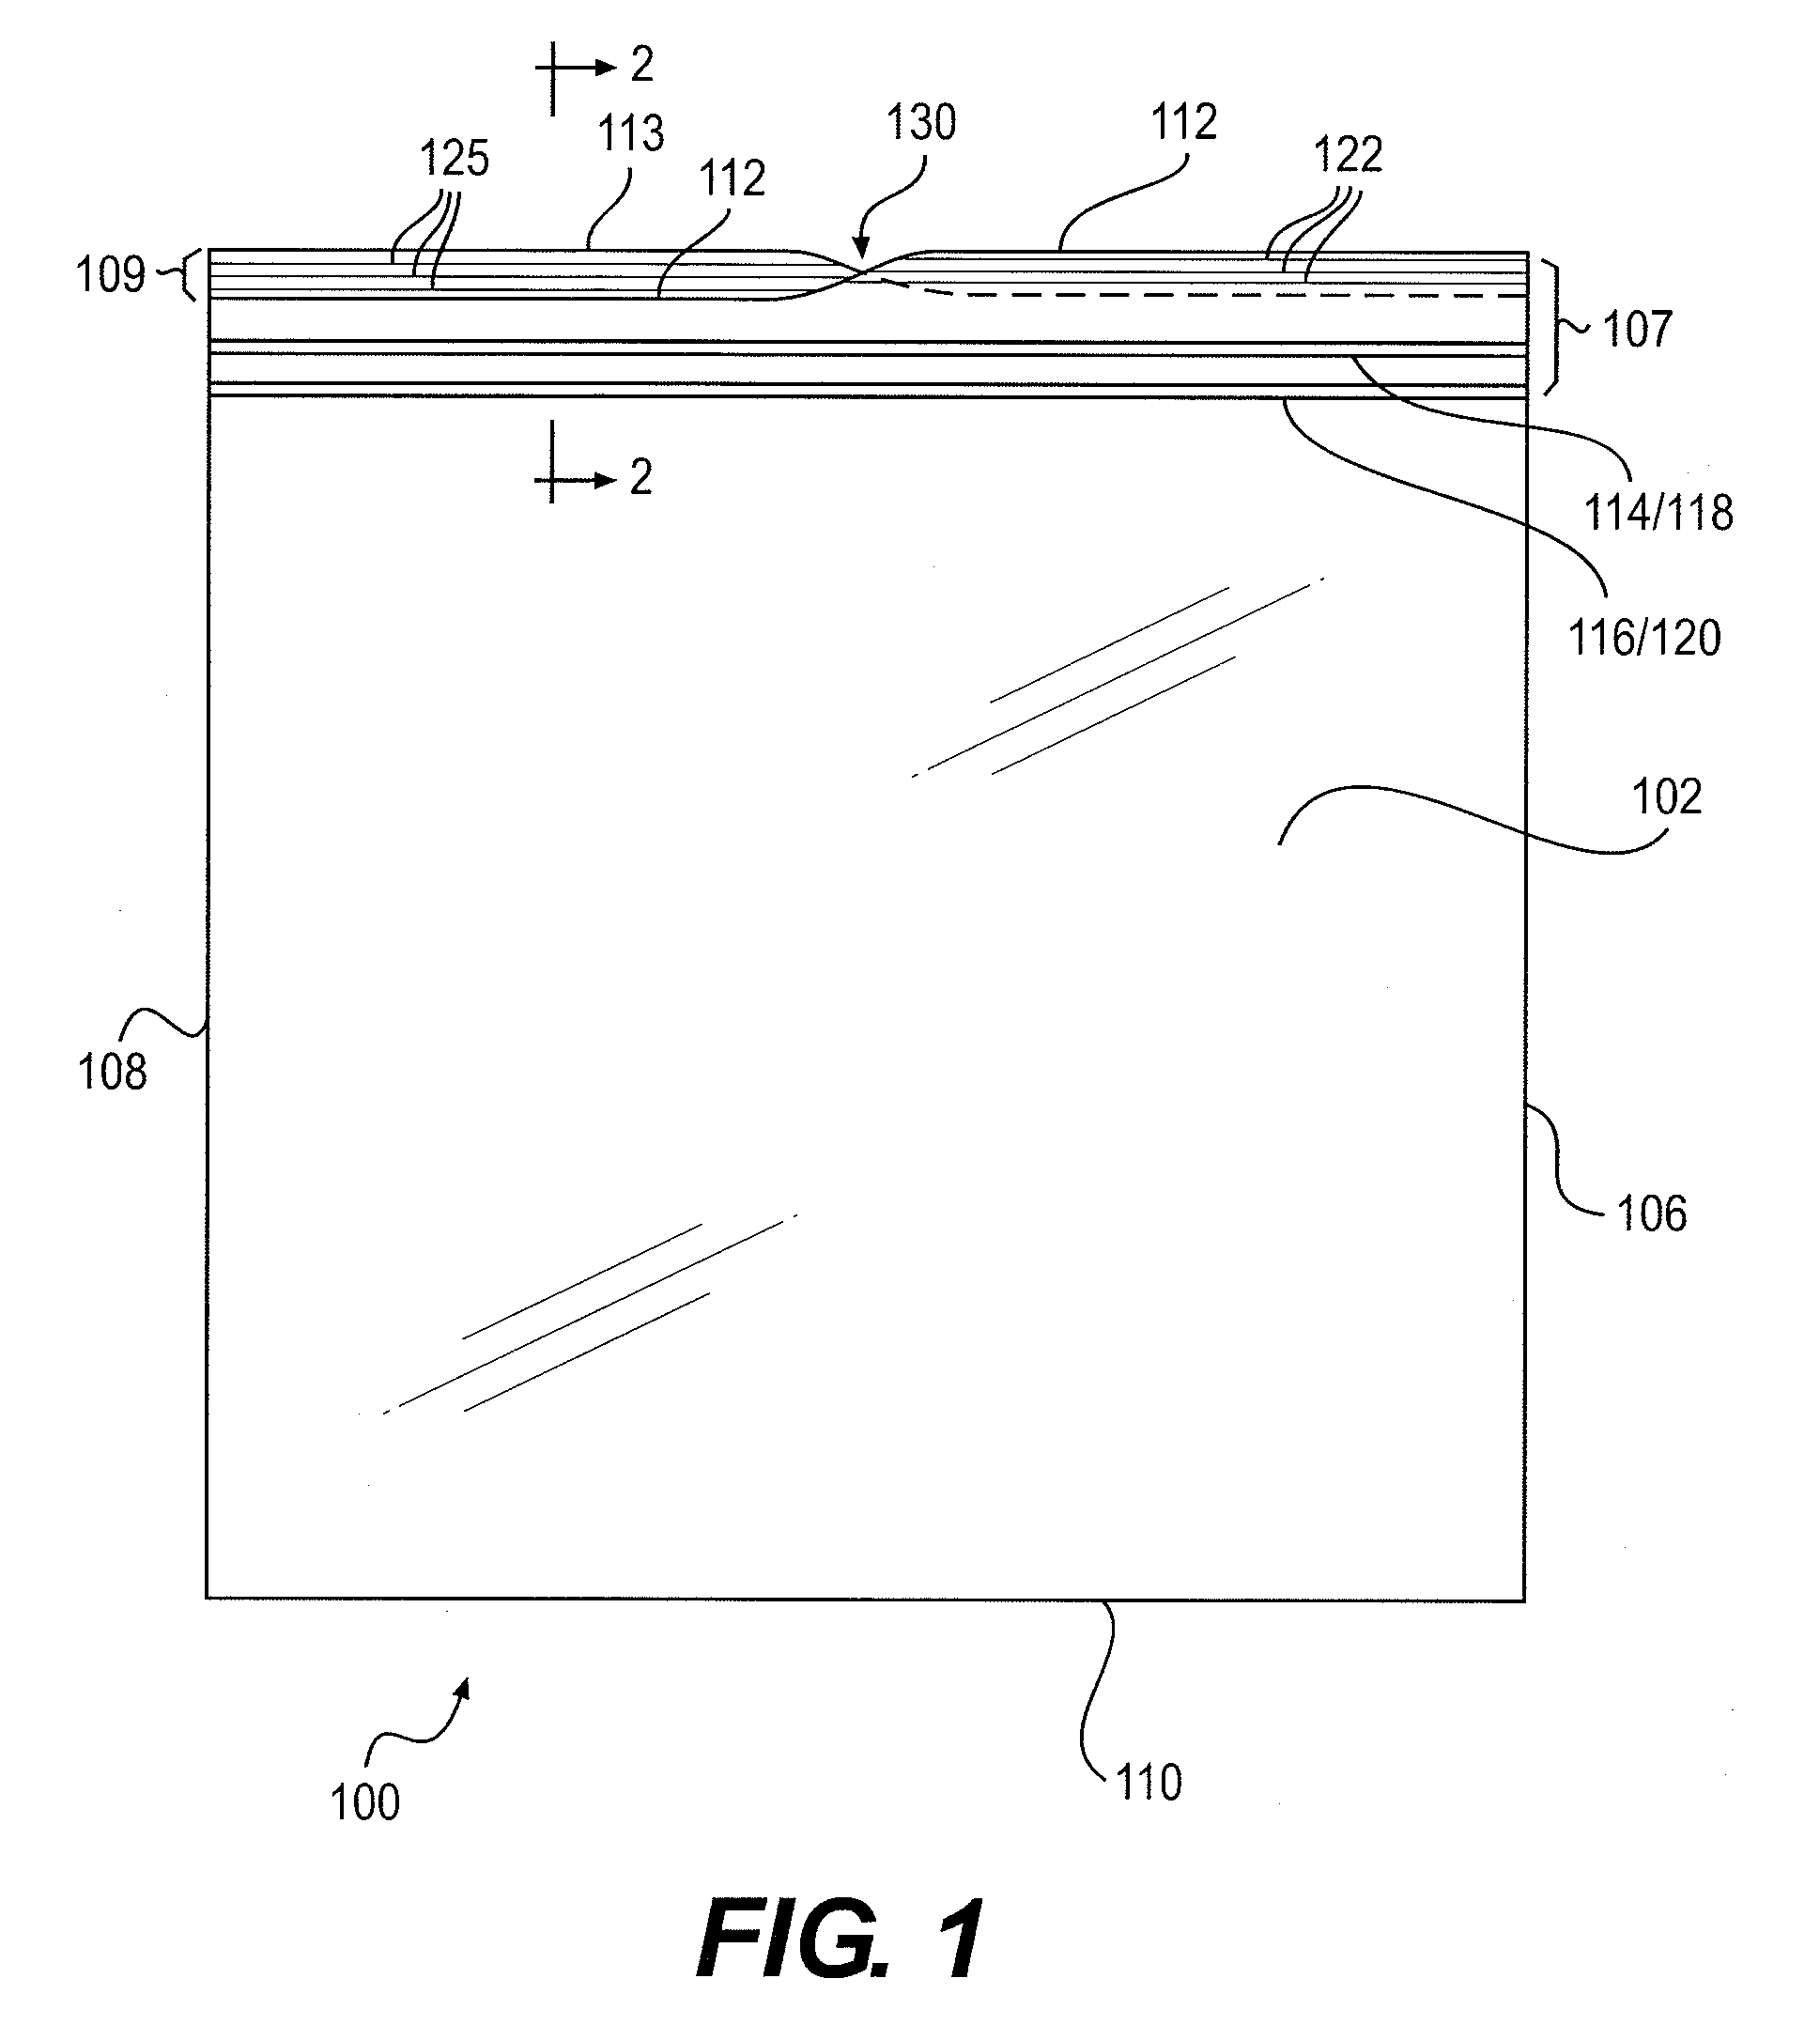 Storage bag with textured area on lips to facilitate closing process